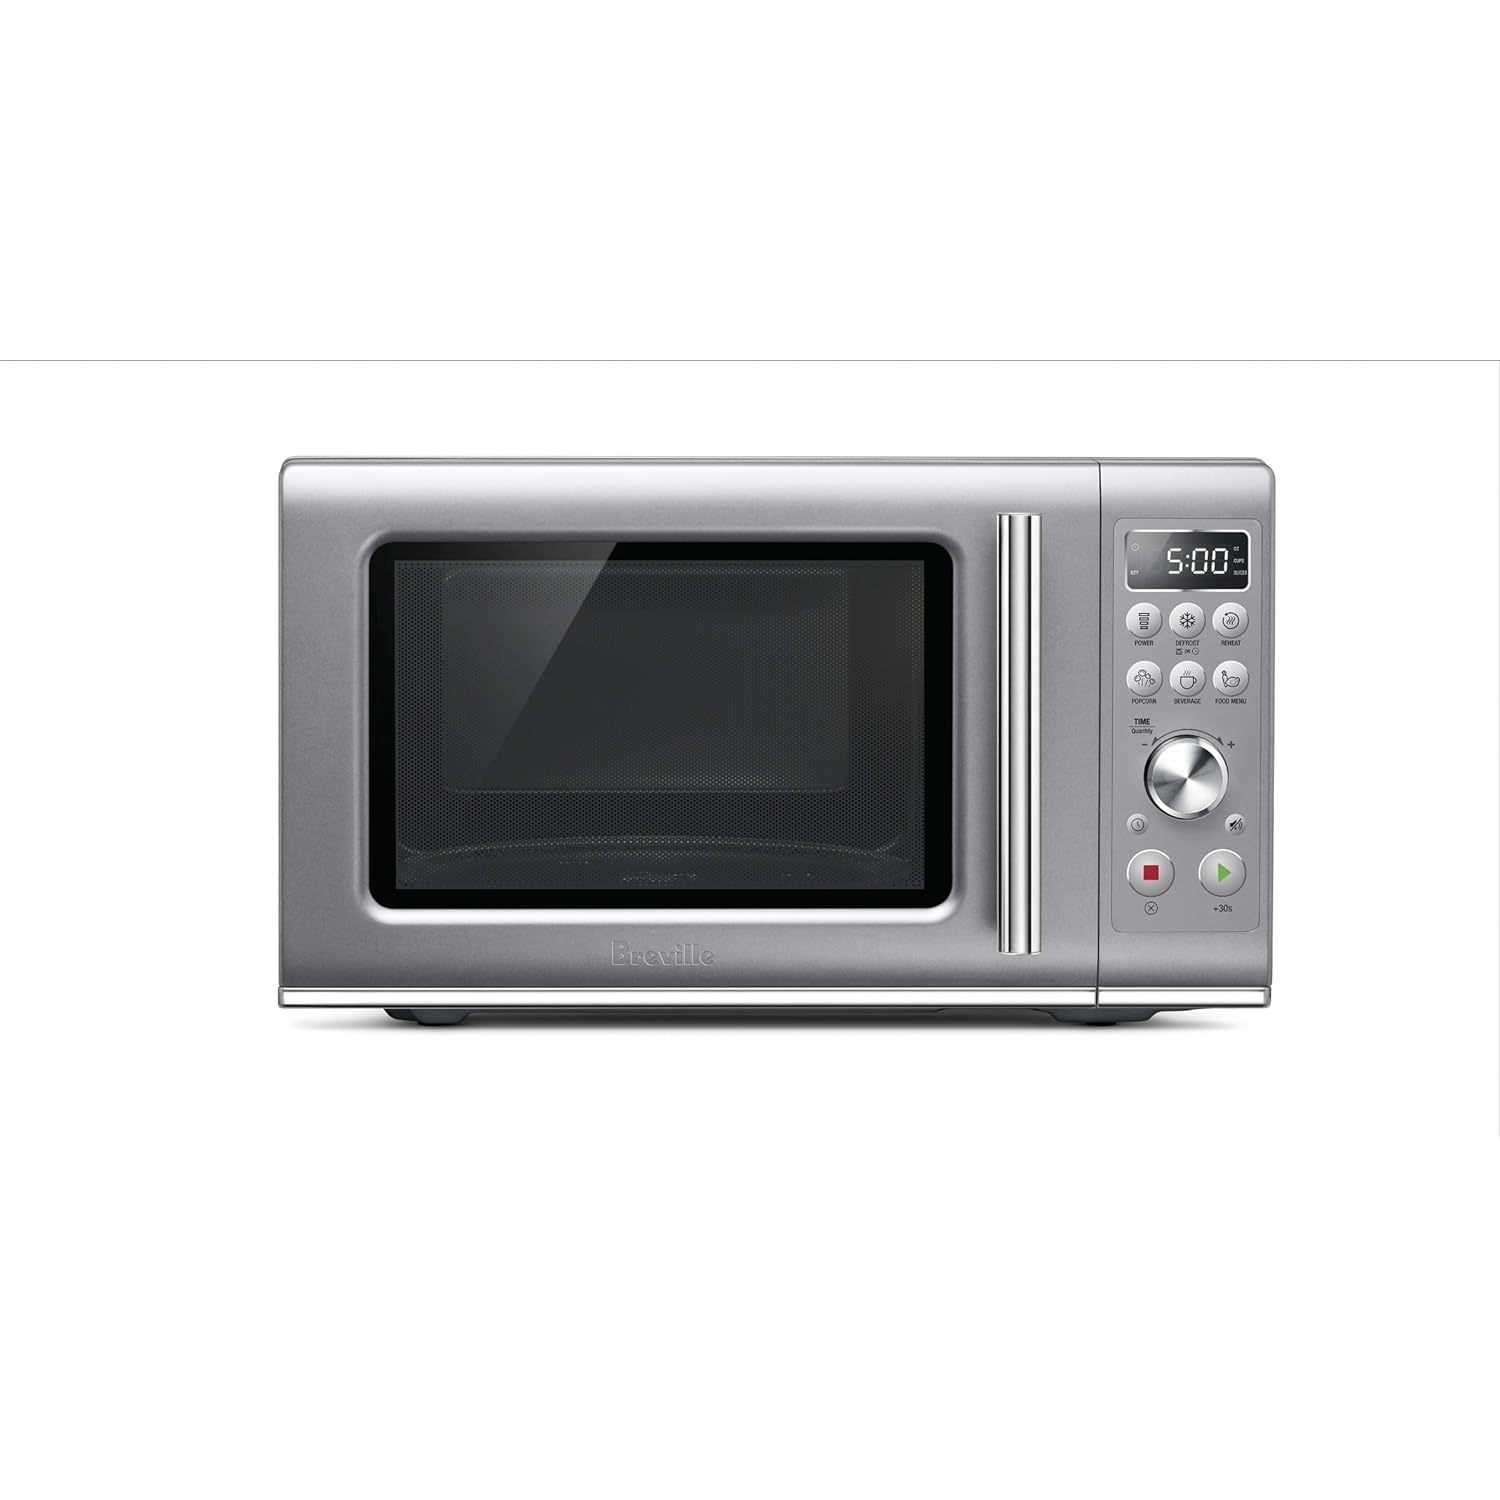 Primary image for Breville Compact Wave Soft-Close Microwave Oven, Silver, BMO650SIL